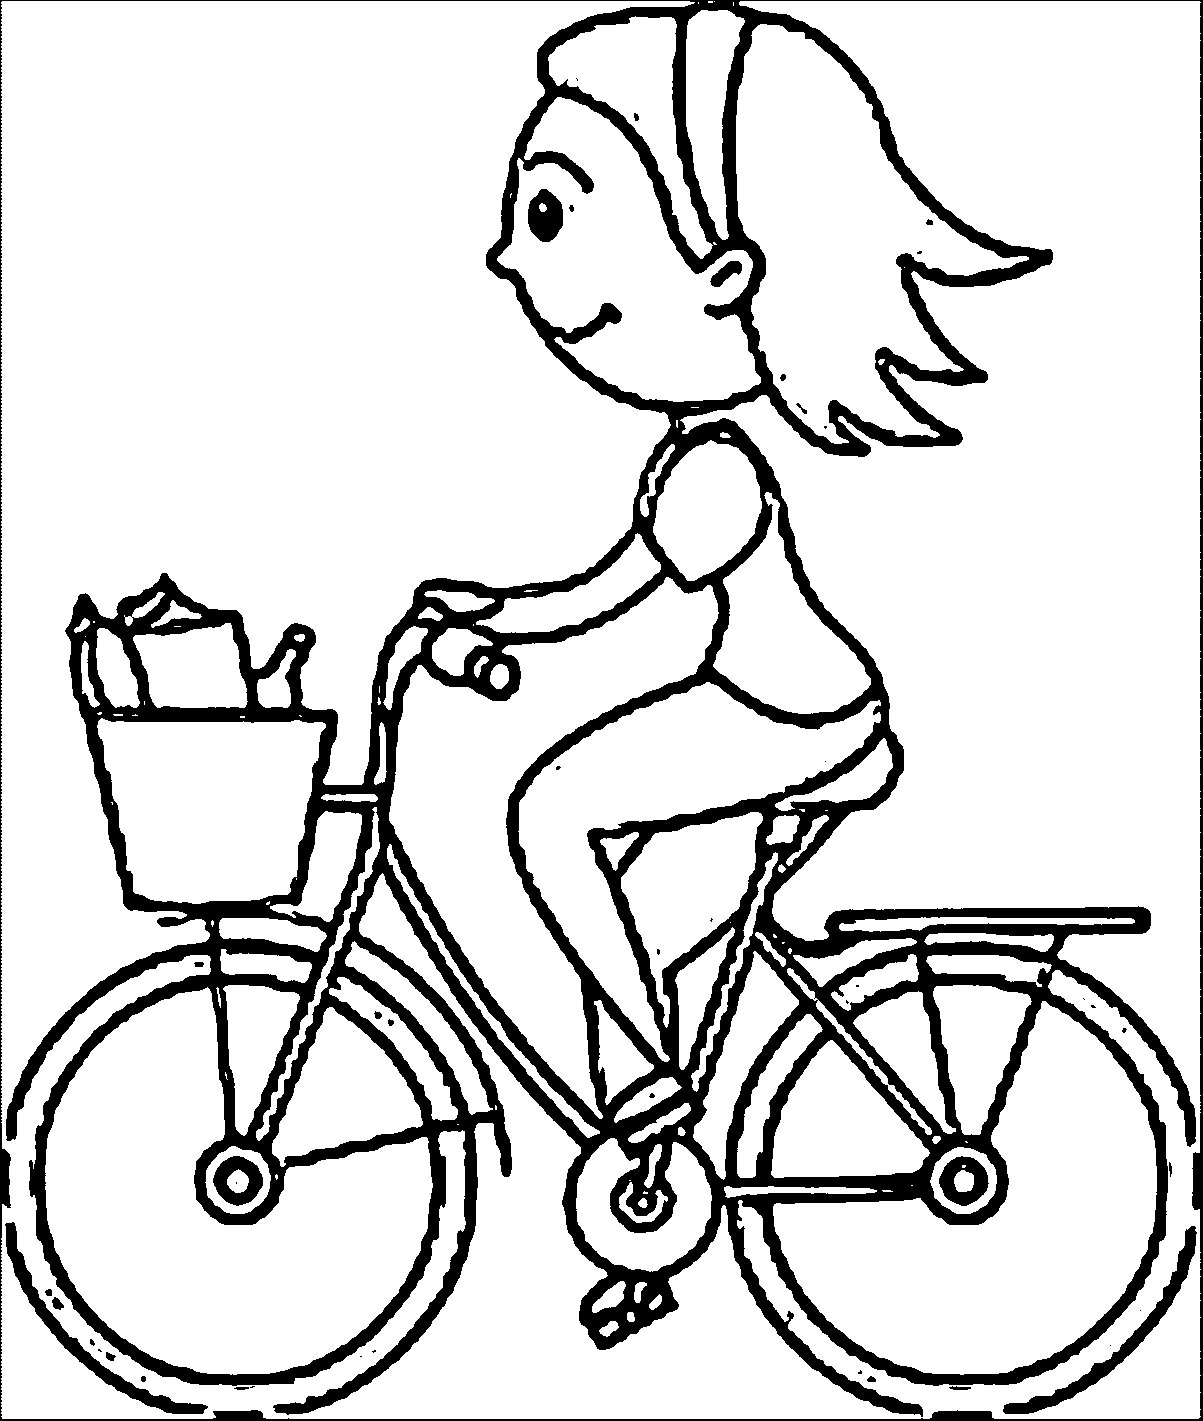 Riding Bicycle With Full Basket